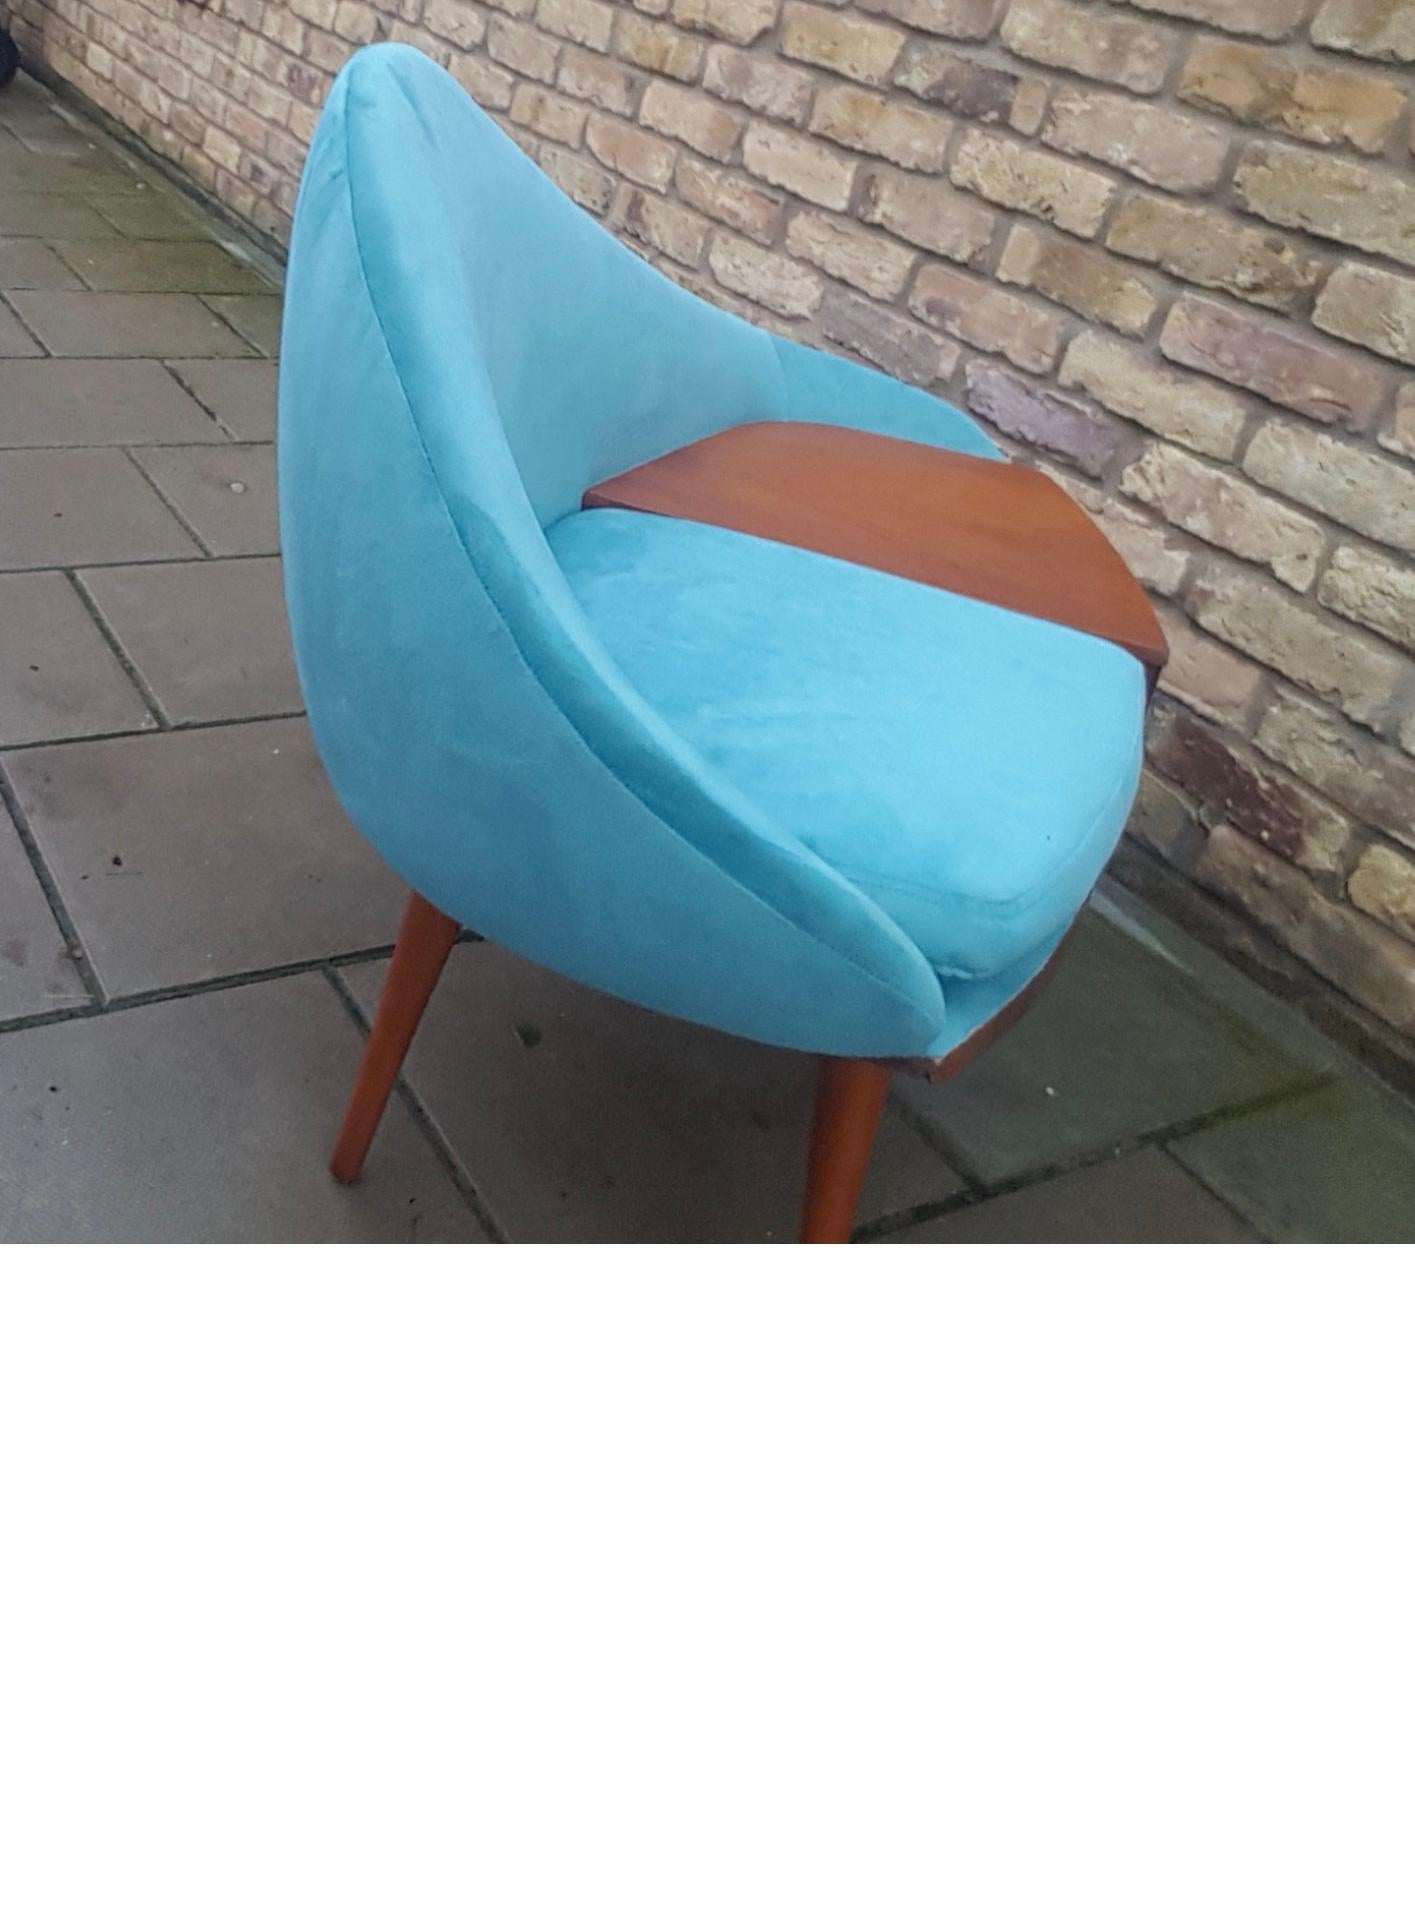 Well-shaped sofa telephone table upholstered in lovely blue fabric
with front storage draw and wonderful tapered lags.
by Chippy Heath uk.